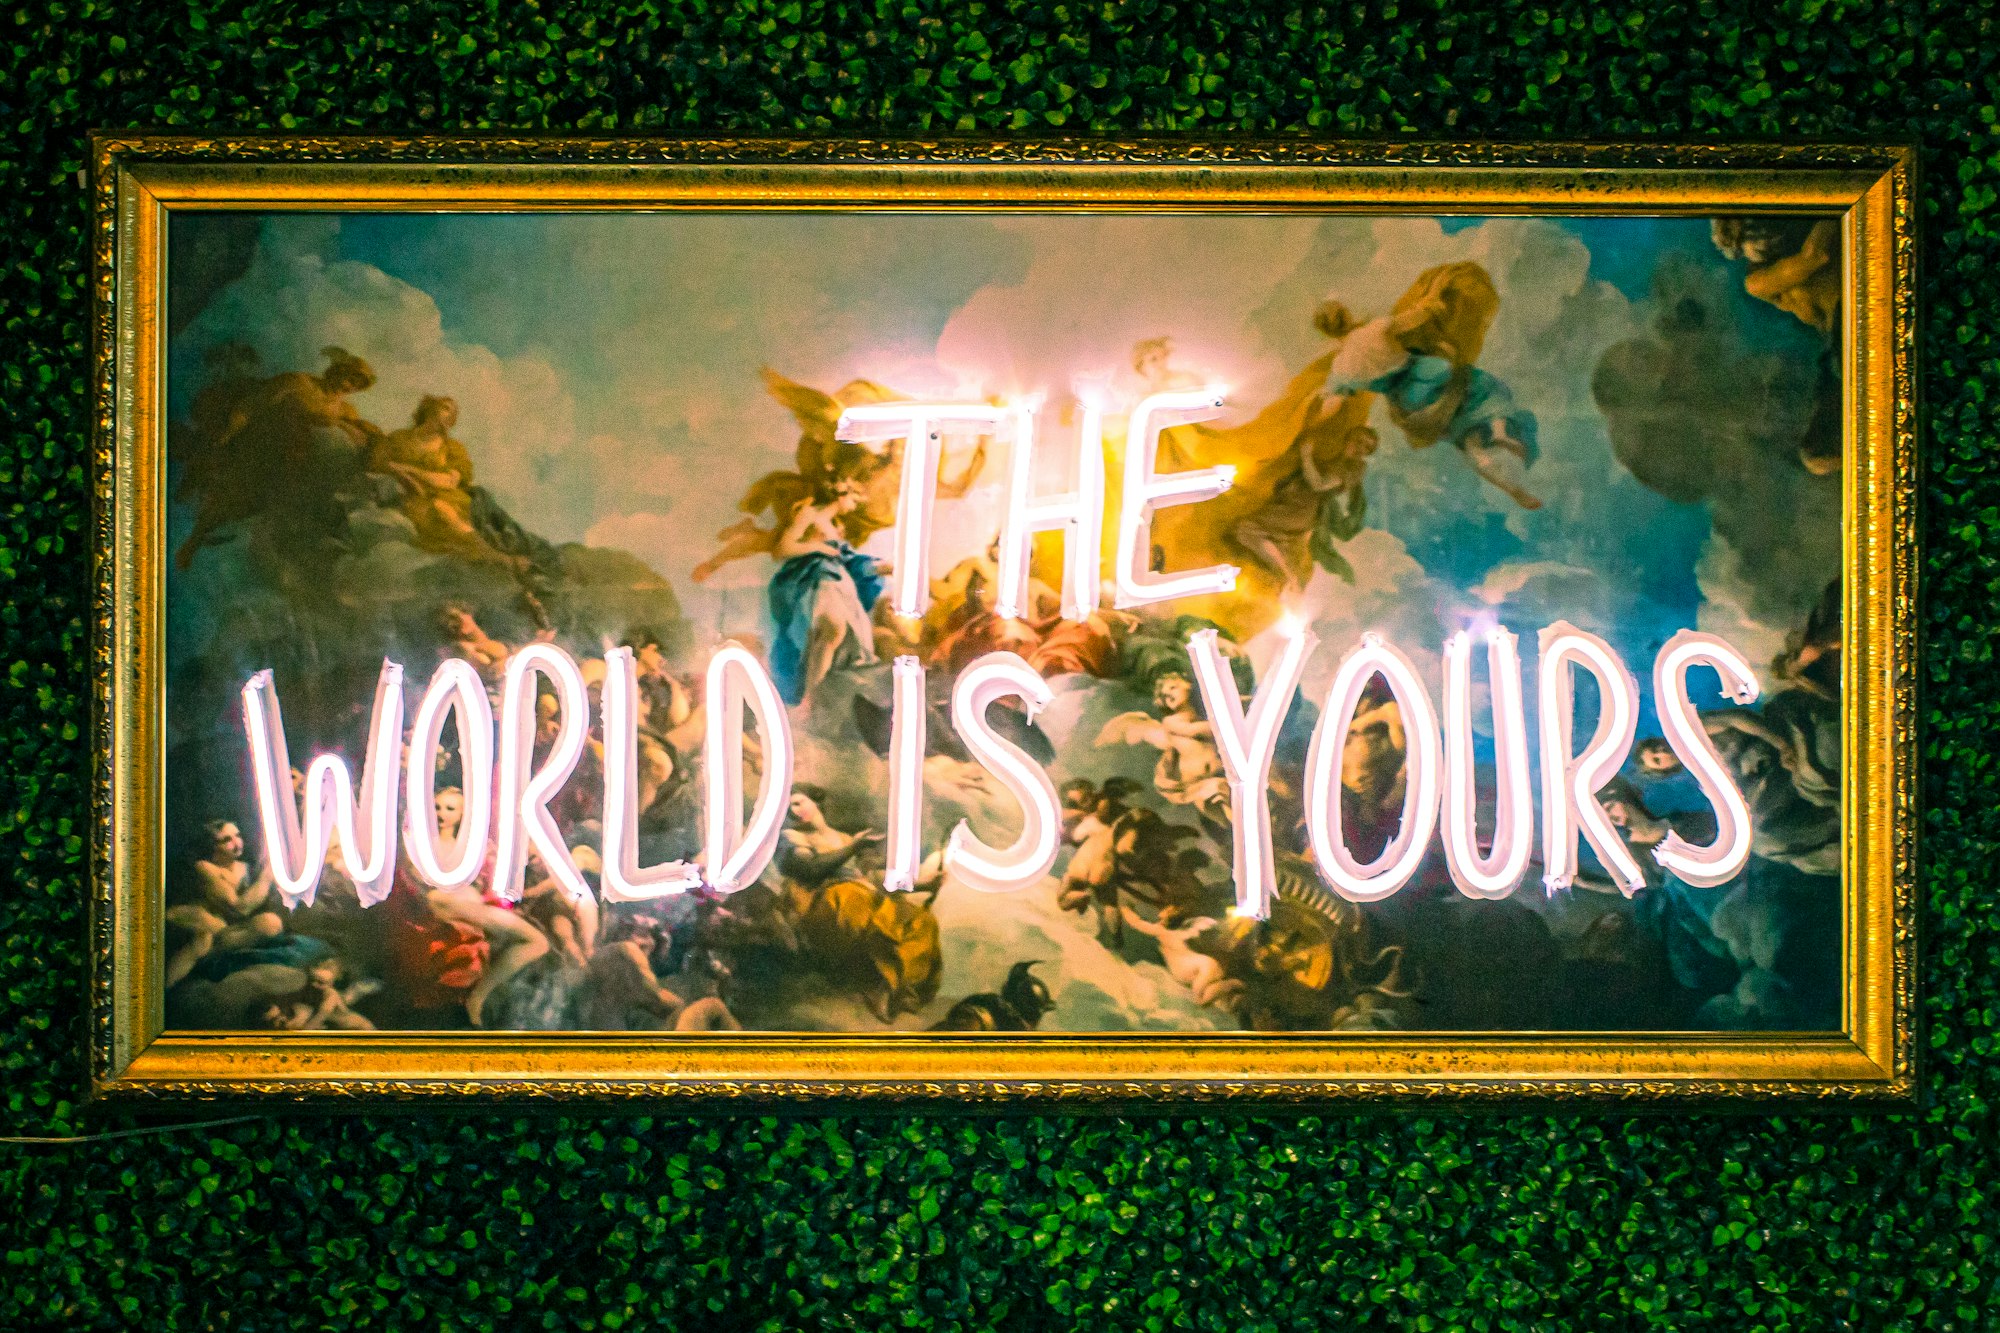 The World is Yours. Take it.